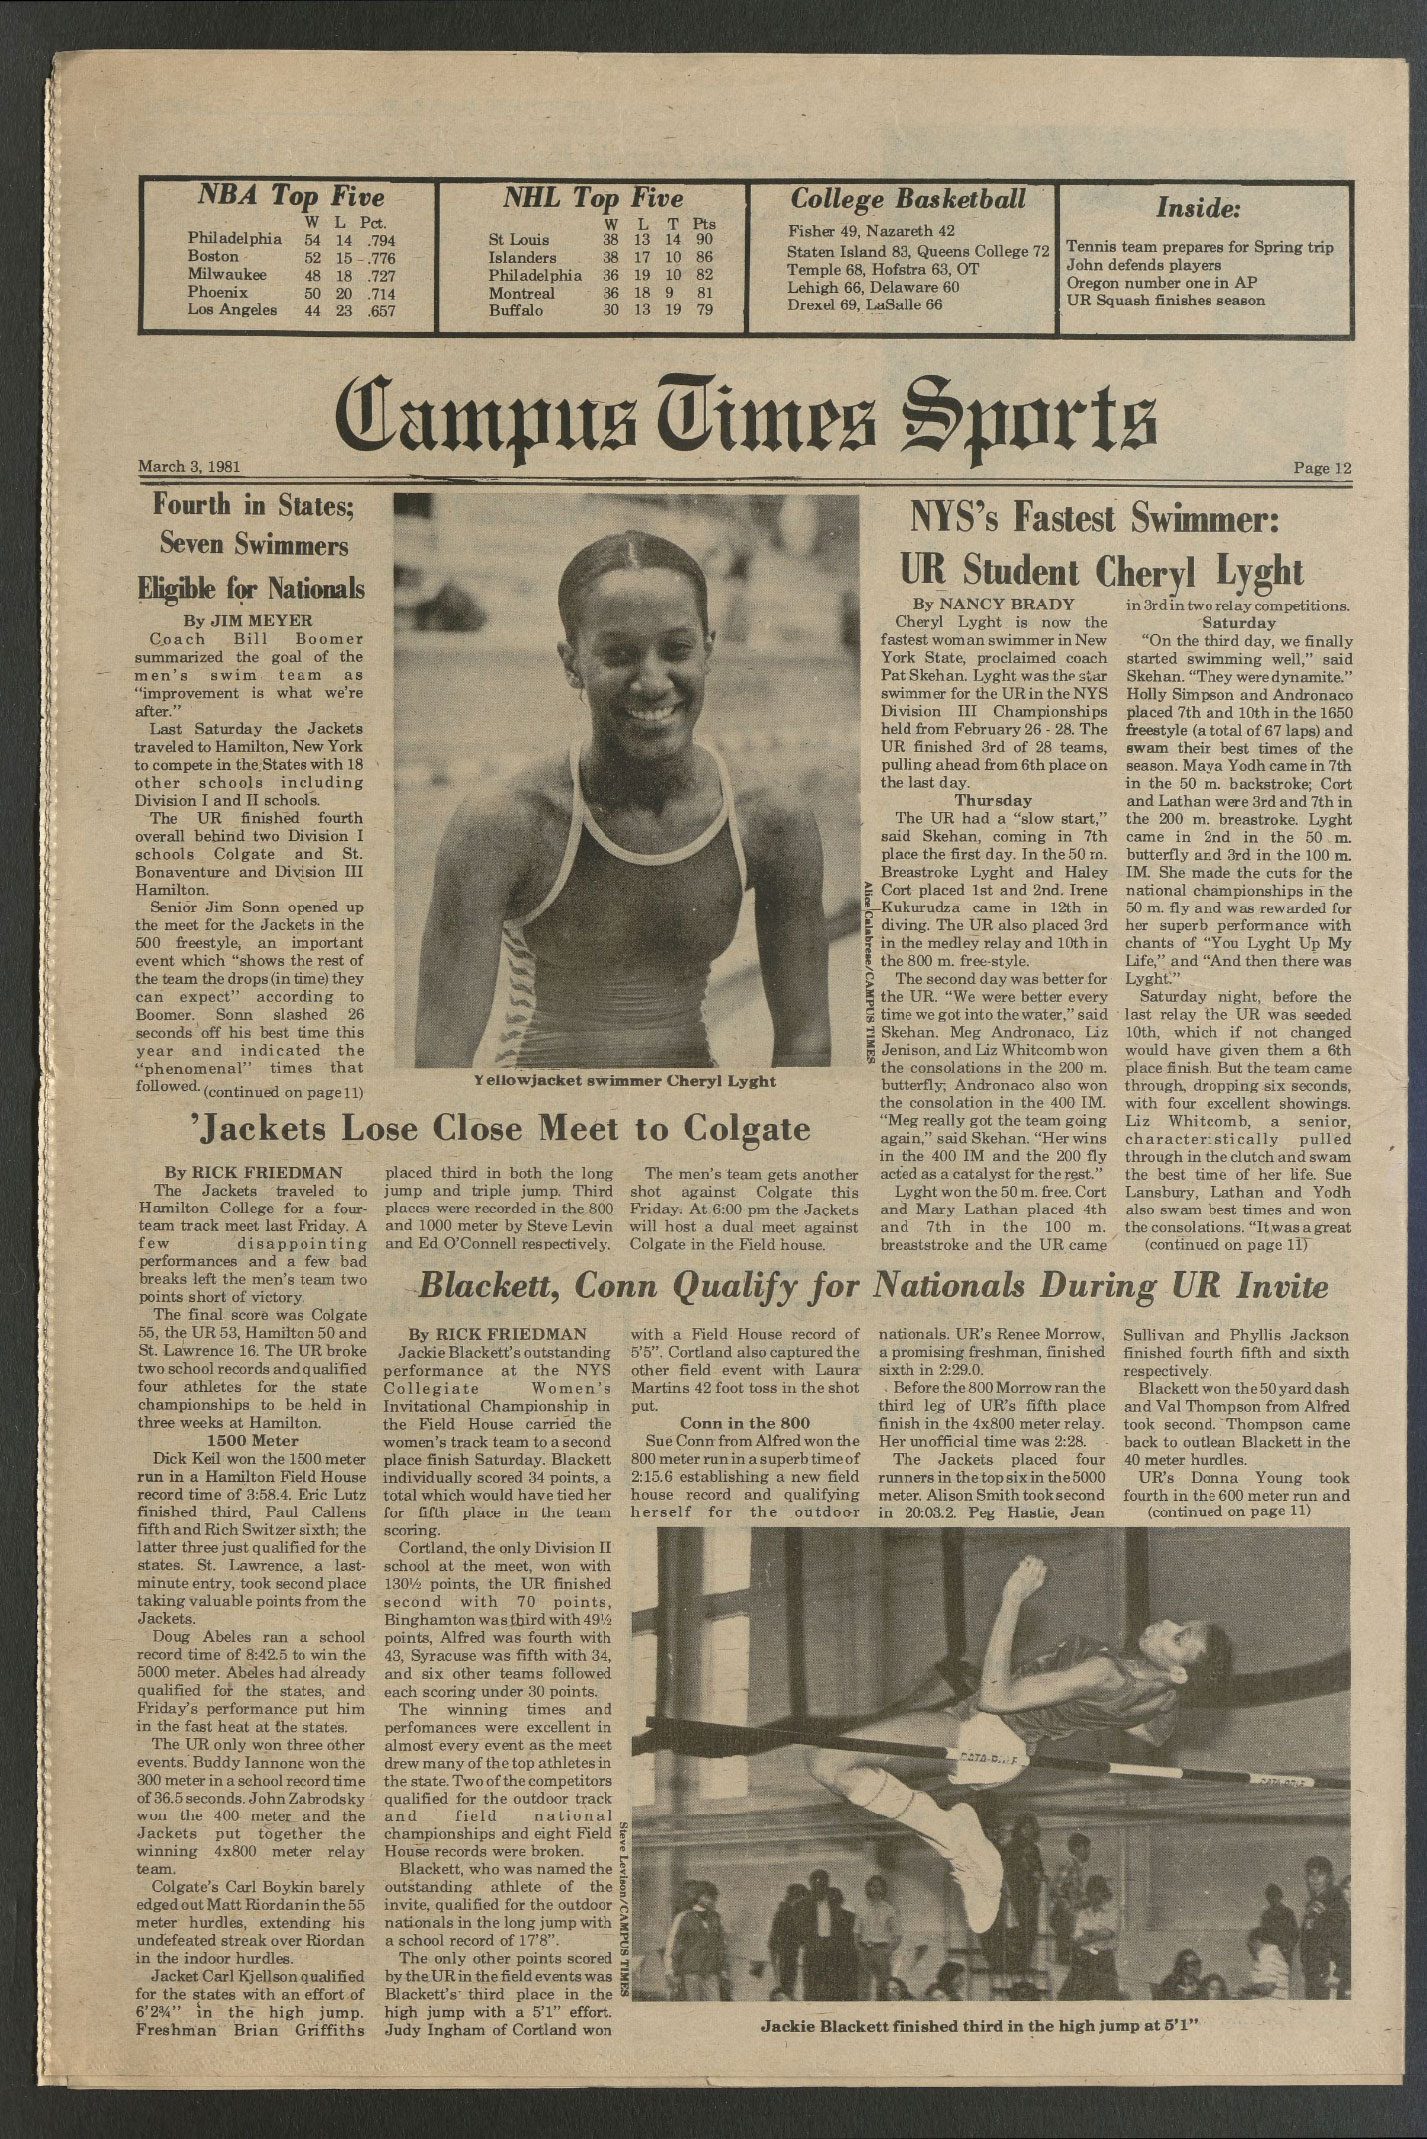 A scan of an article featuring Jackie Blackett ’81 from Campus Times on March 3, 1981.